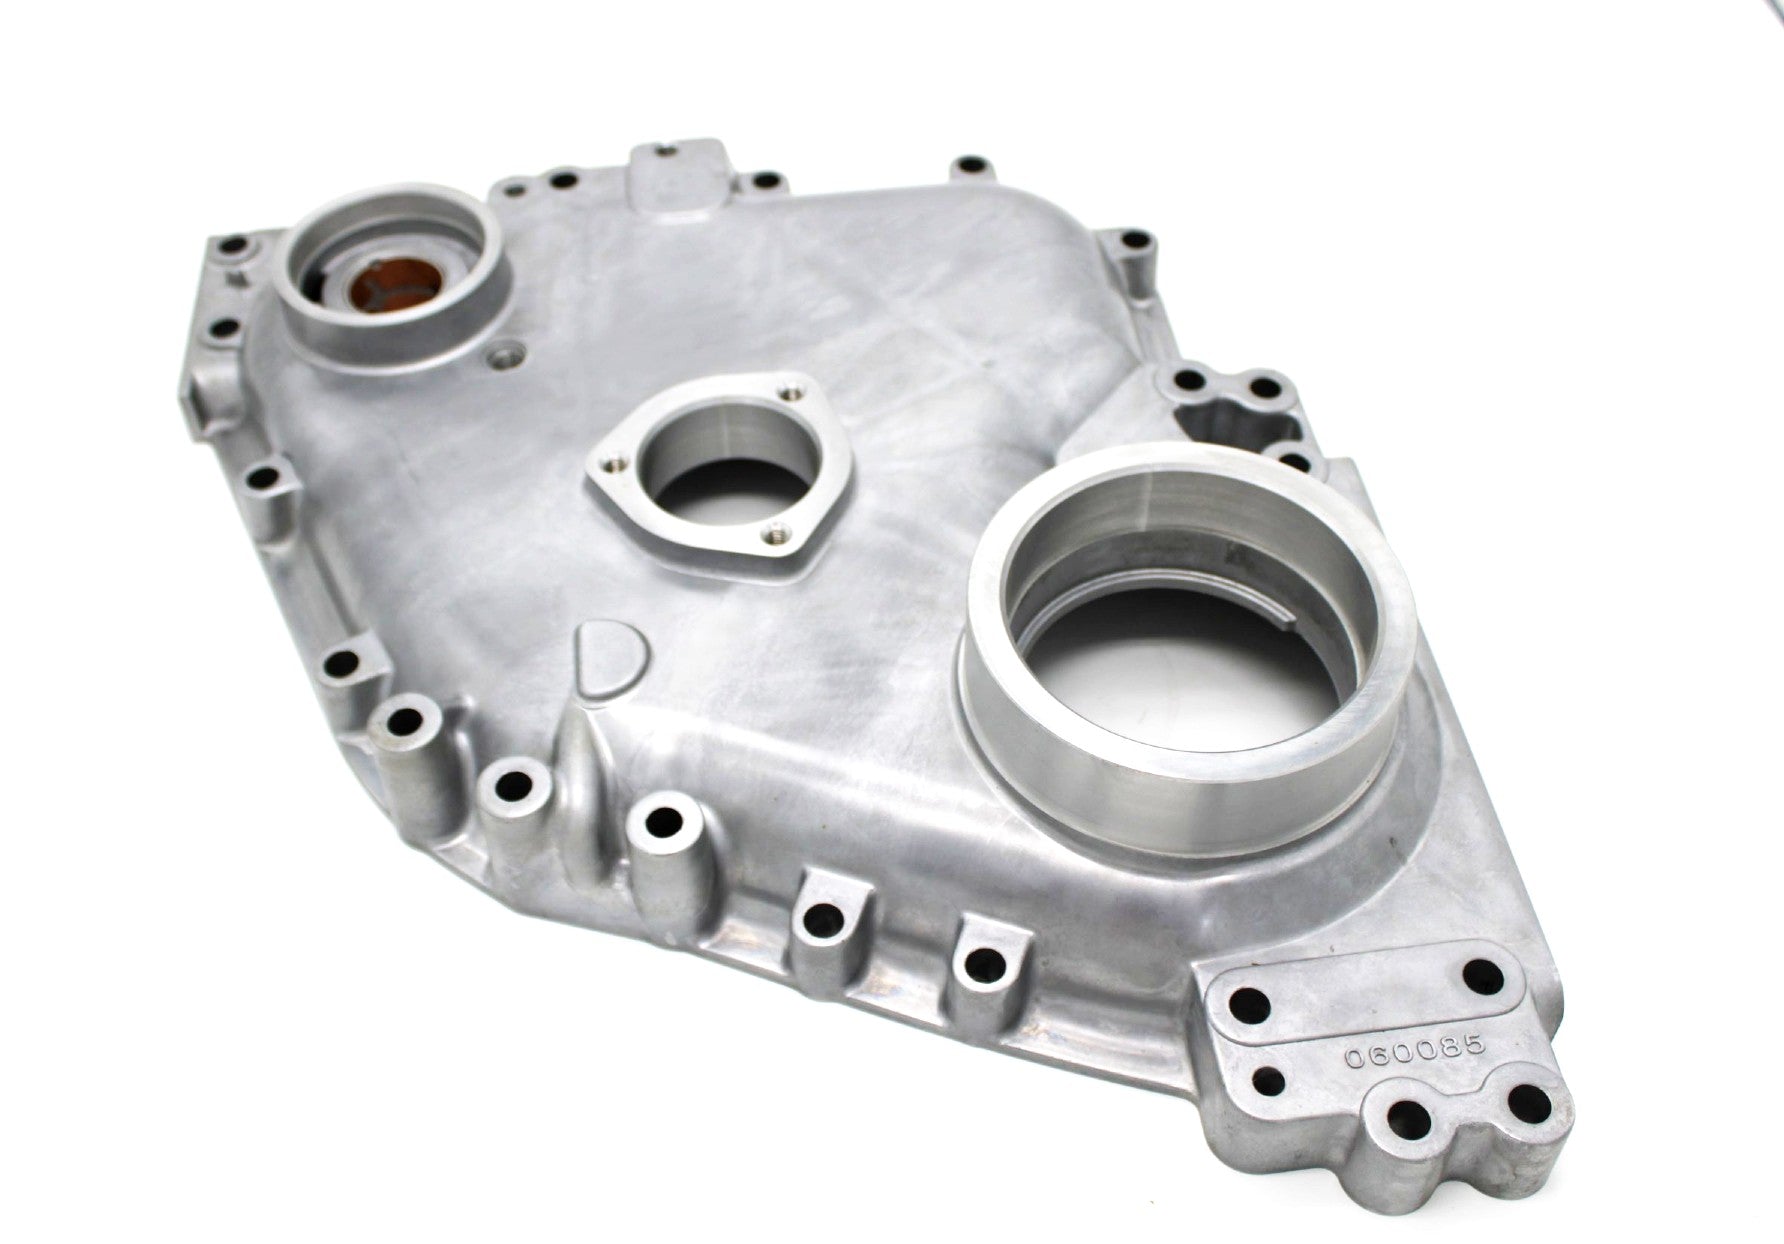 3024442 | Cummins 855/ N14 CELECT Front Timing Cover